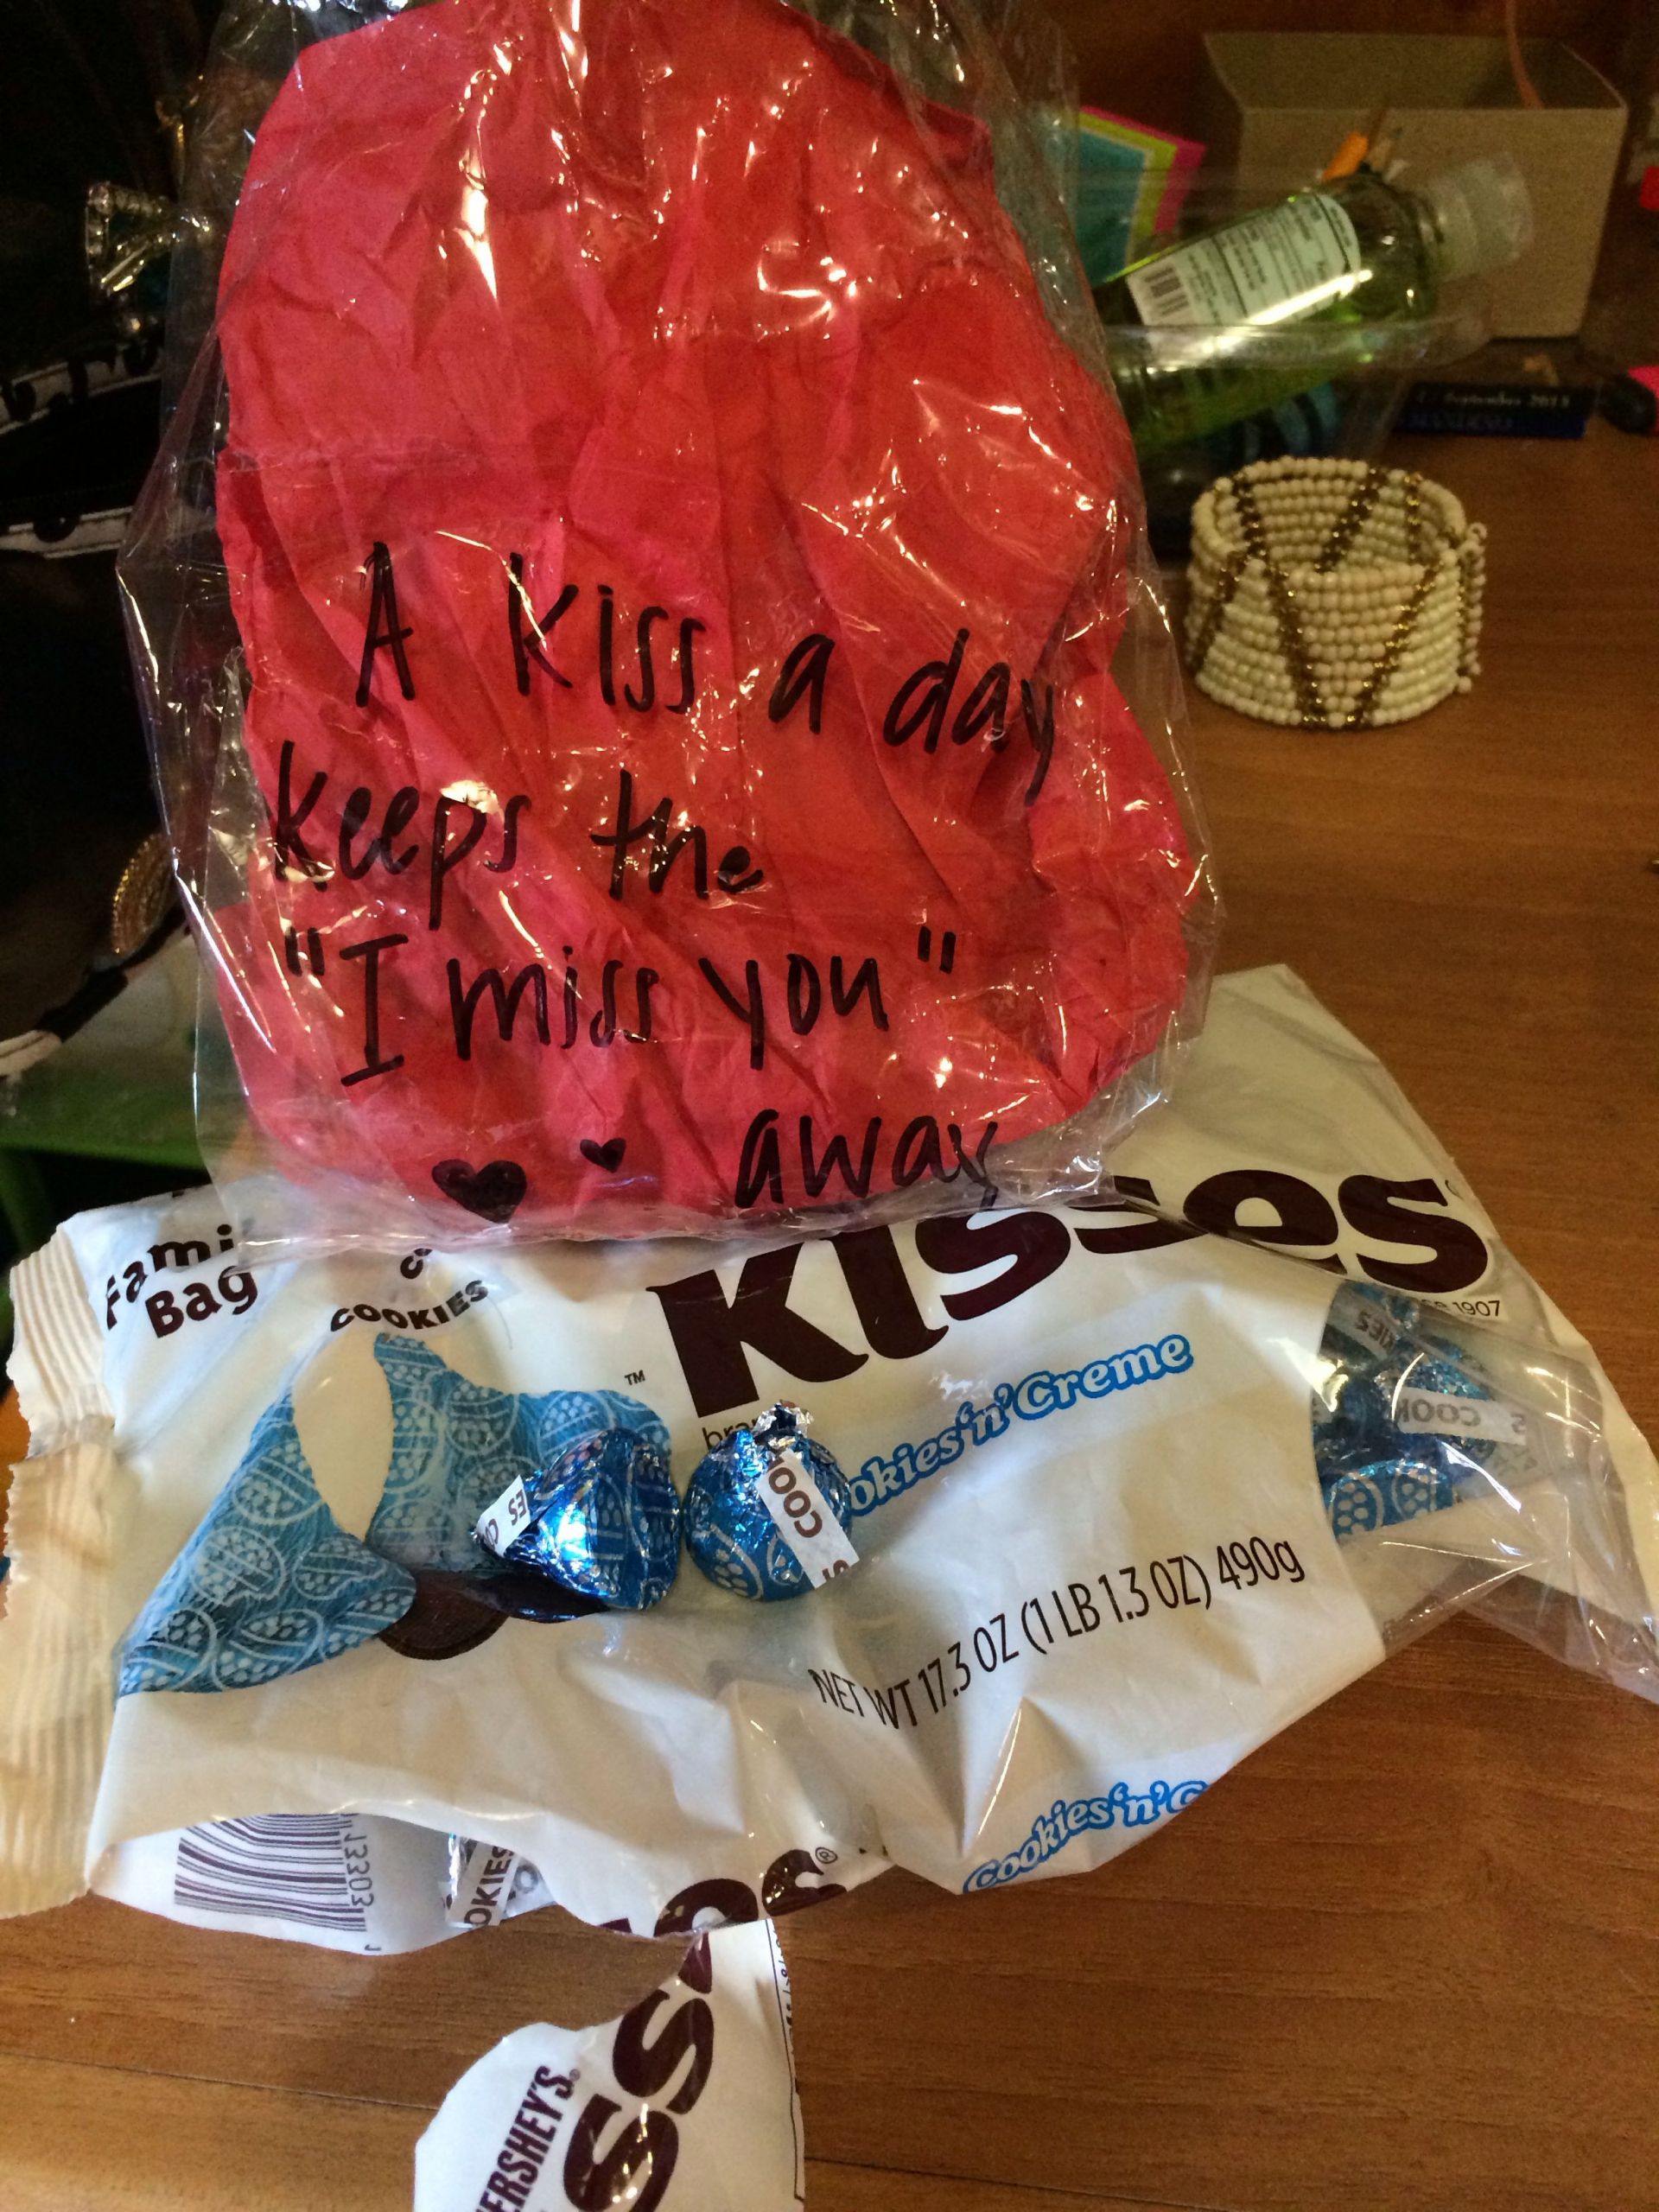 Going Away Gift Ideas For Girlfriend
 "A kiss a day keeps the I miss you away " made with